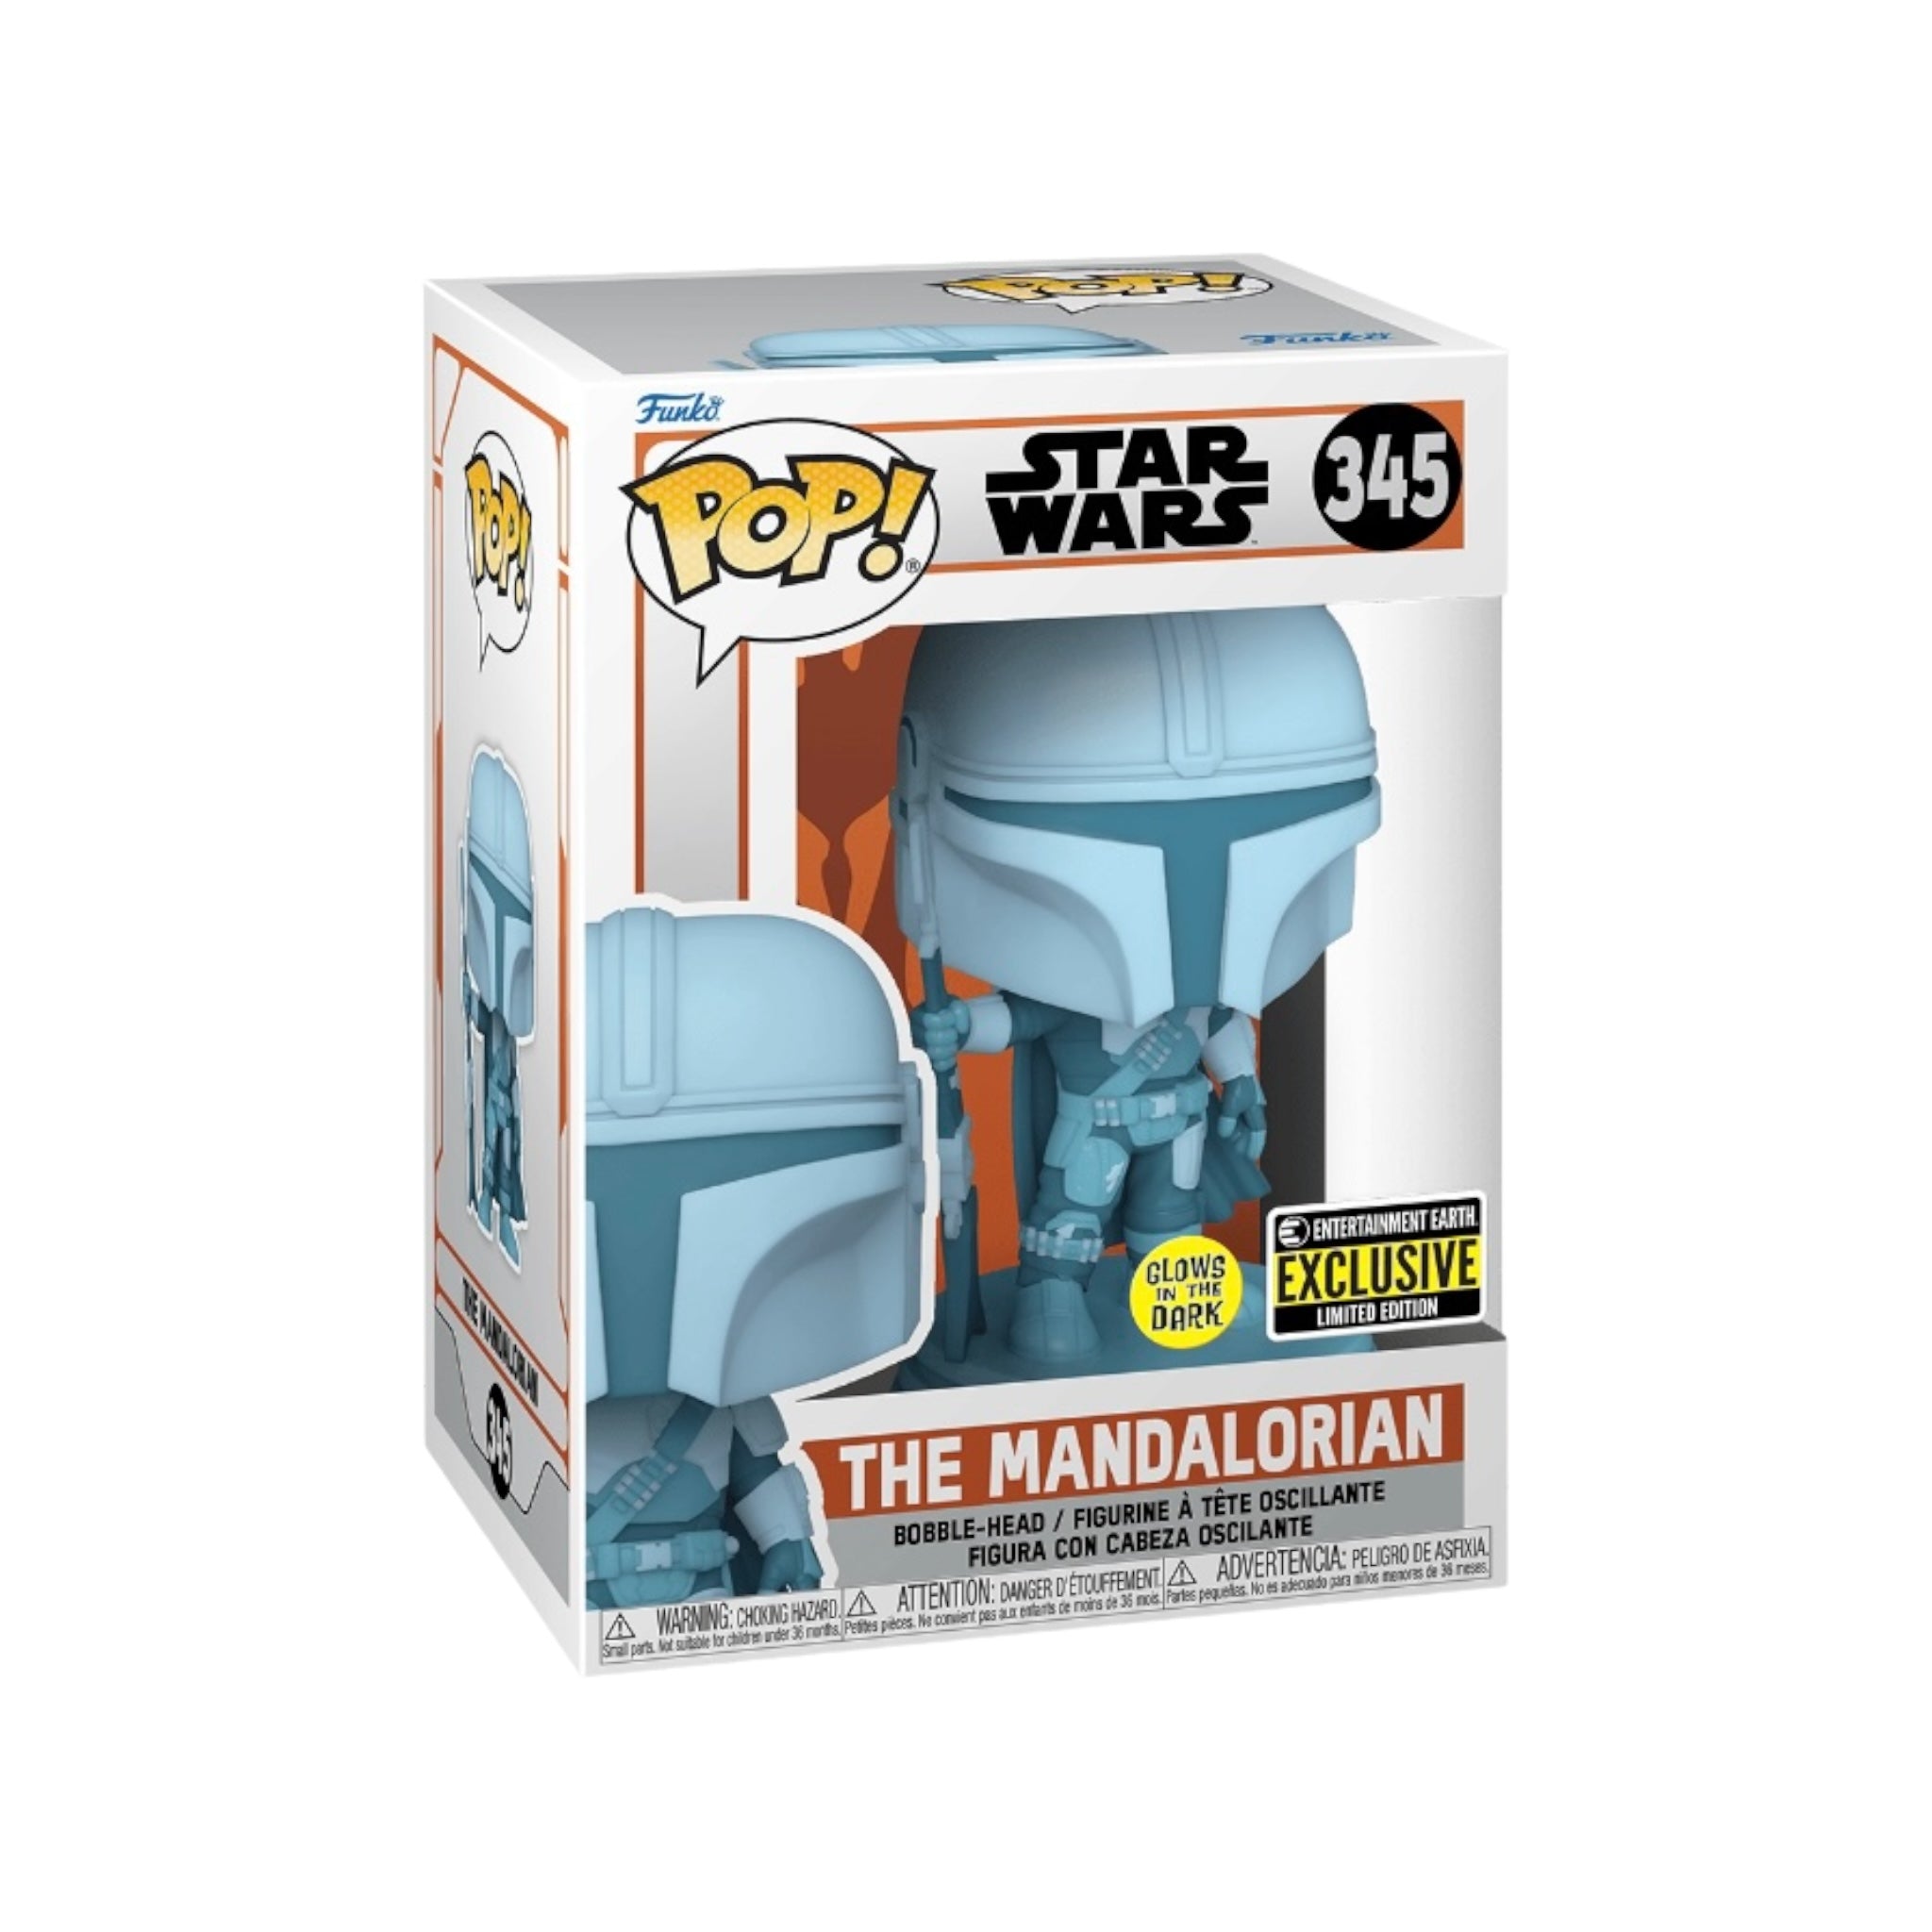 The Mandalorian #345 (Holographic Glows in the Dark) Funko Pop! - Star Wars: The Mandalorian - Entertainment Earth Exclusive